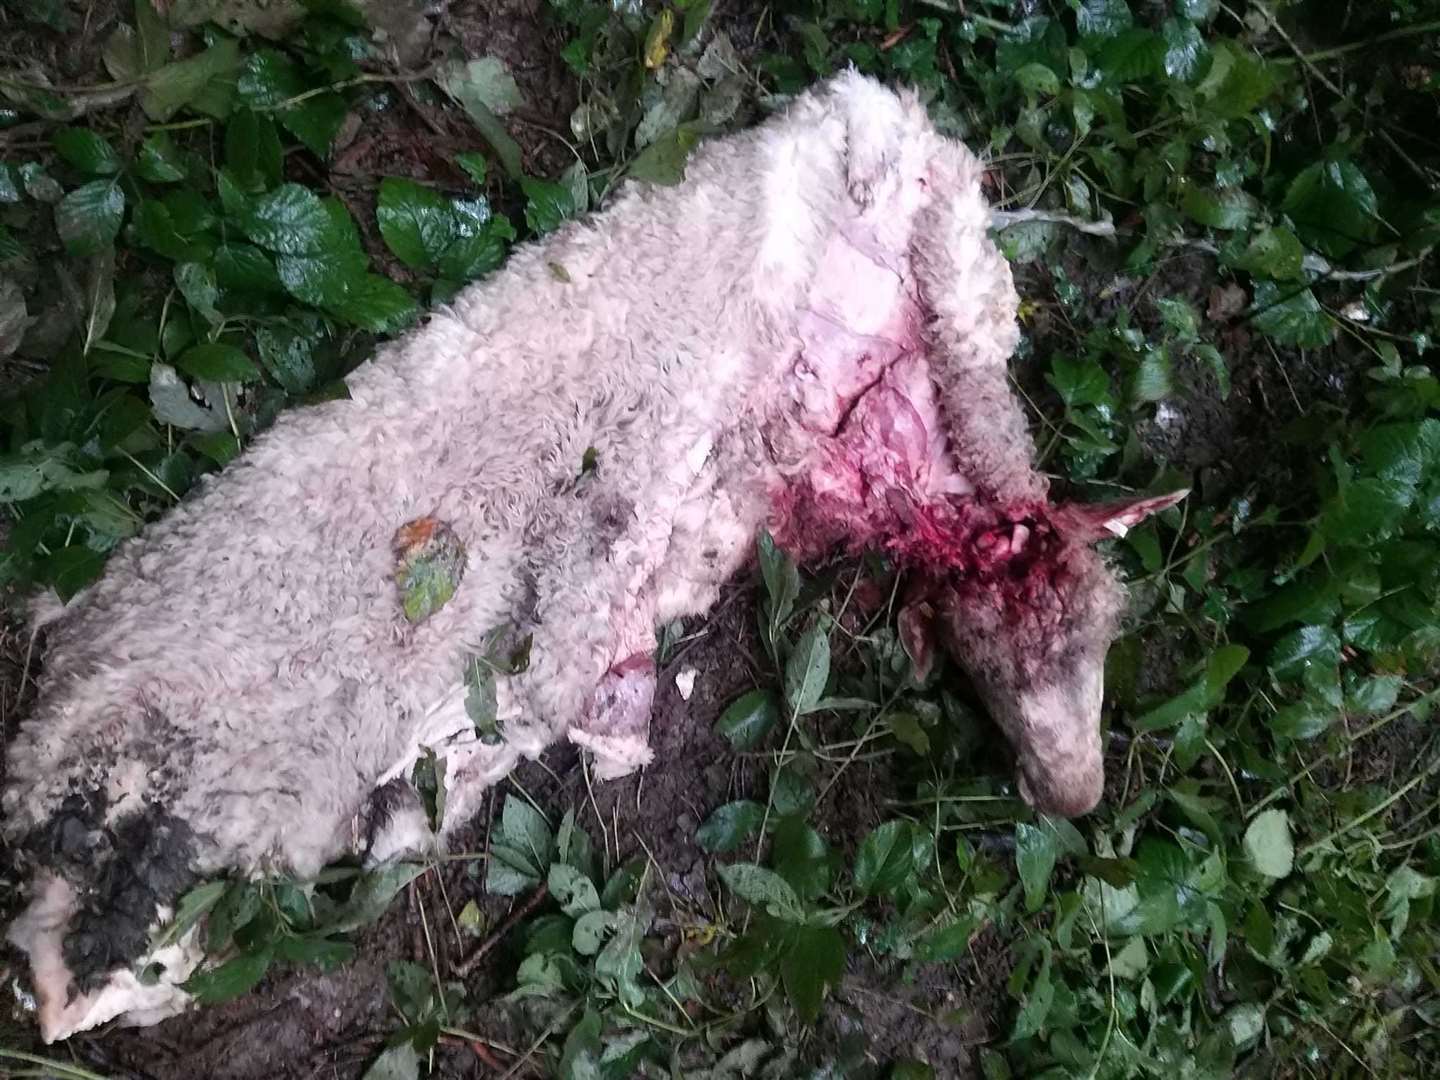 Sheep carcass found in a field in Doddington near Sittingbourne. All which was left was its fleece. Picture: Ellen Eagles